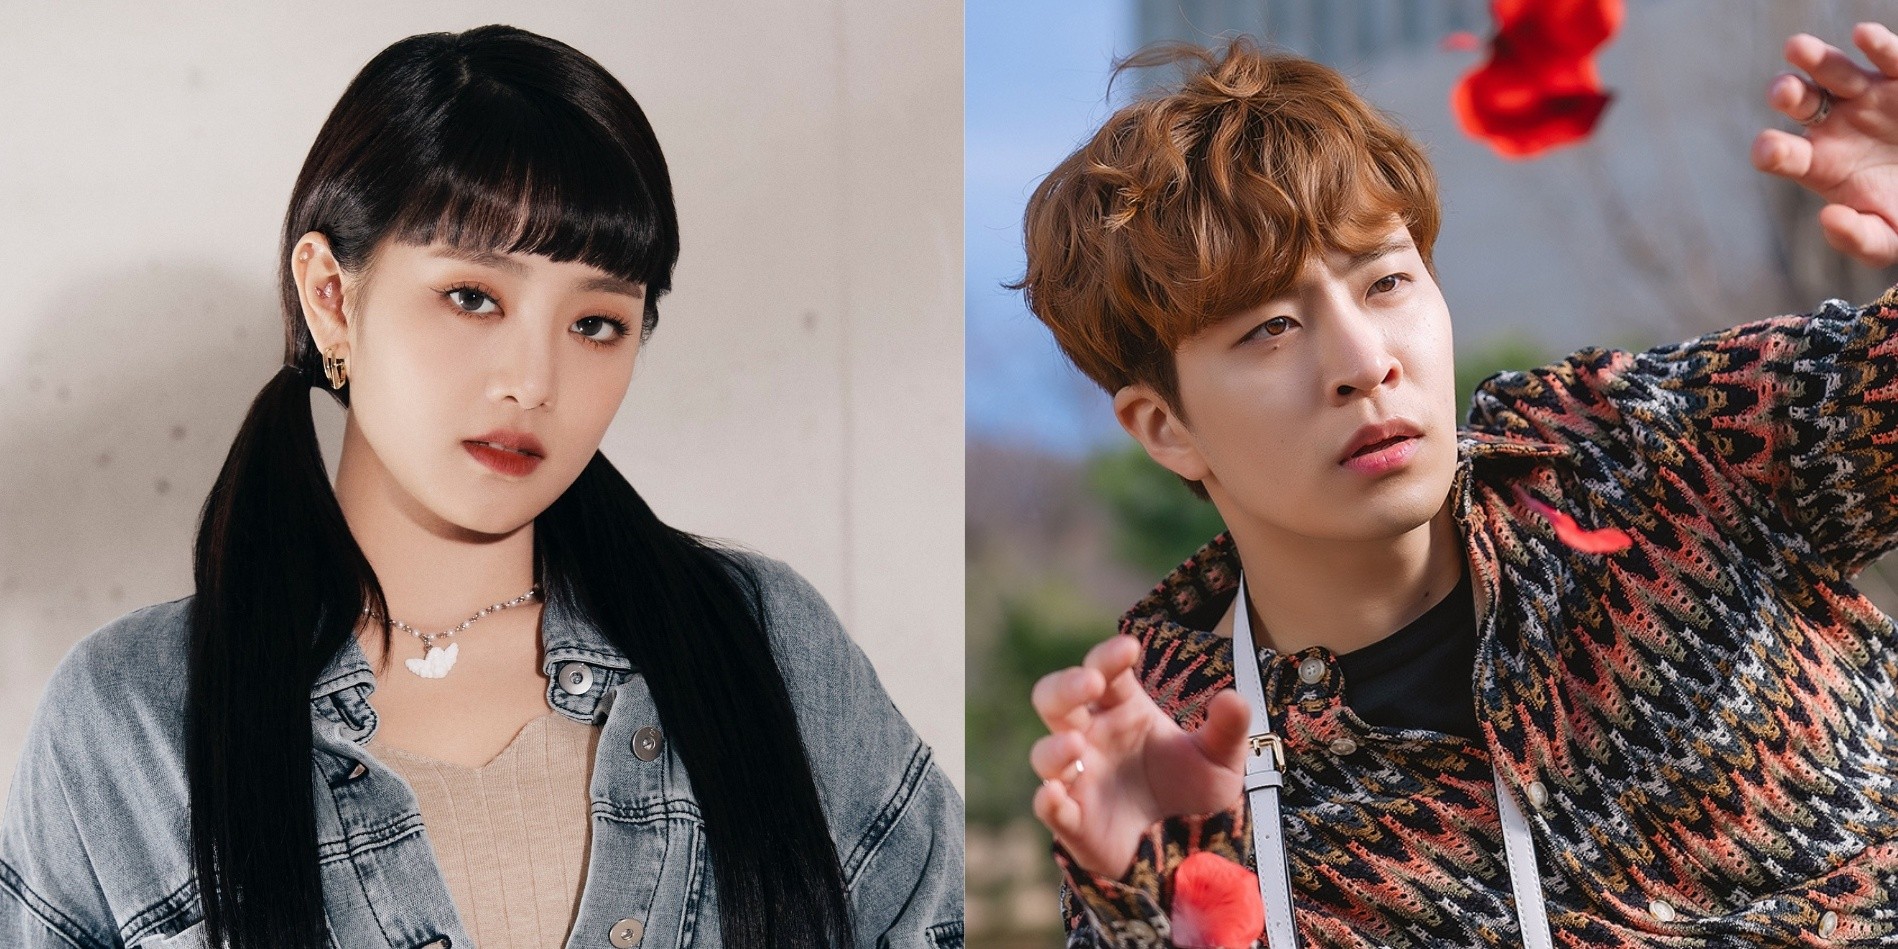 Netflix sitcom starring GOT7's Youngjae and (G)I-DLE's Minnie, 'So Not Worth It', to premiere this June